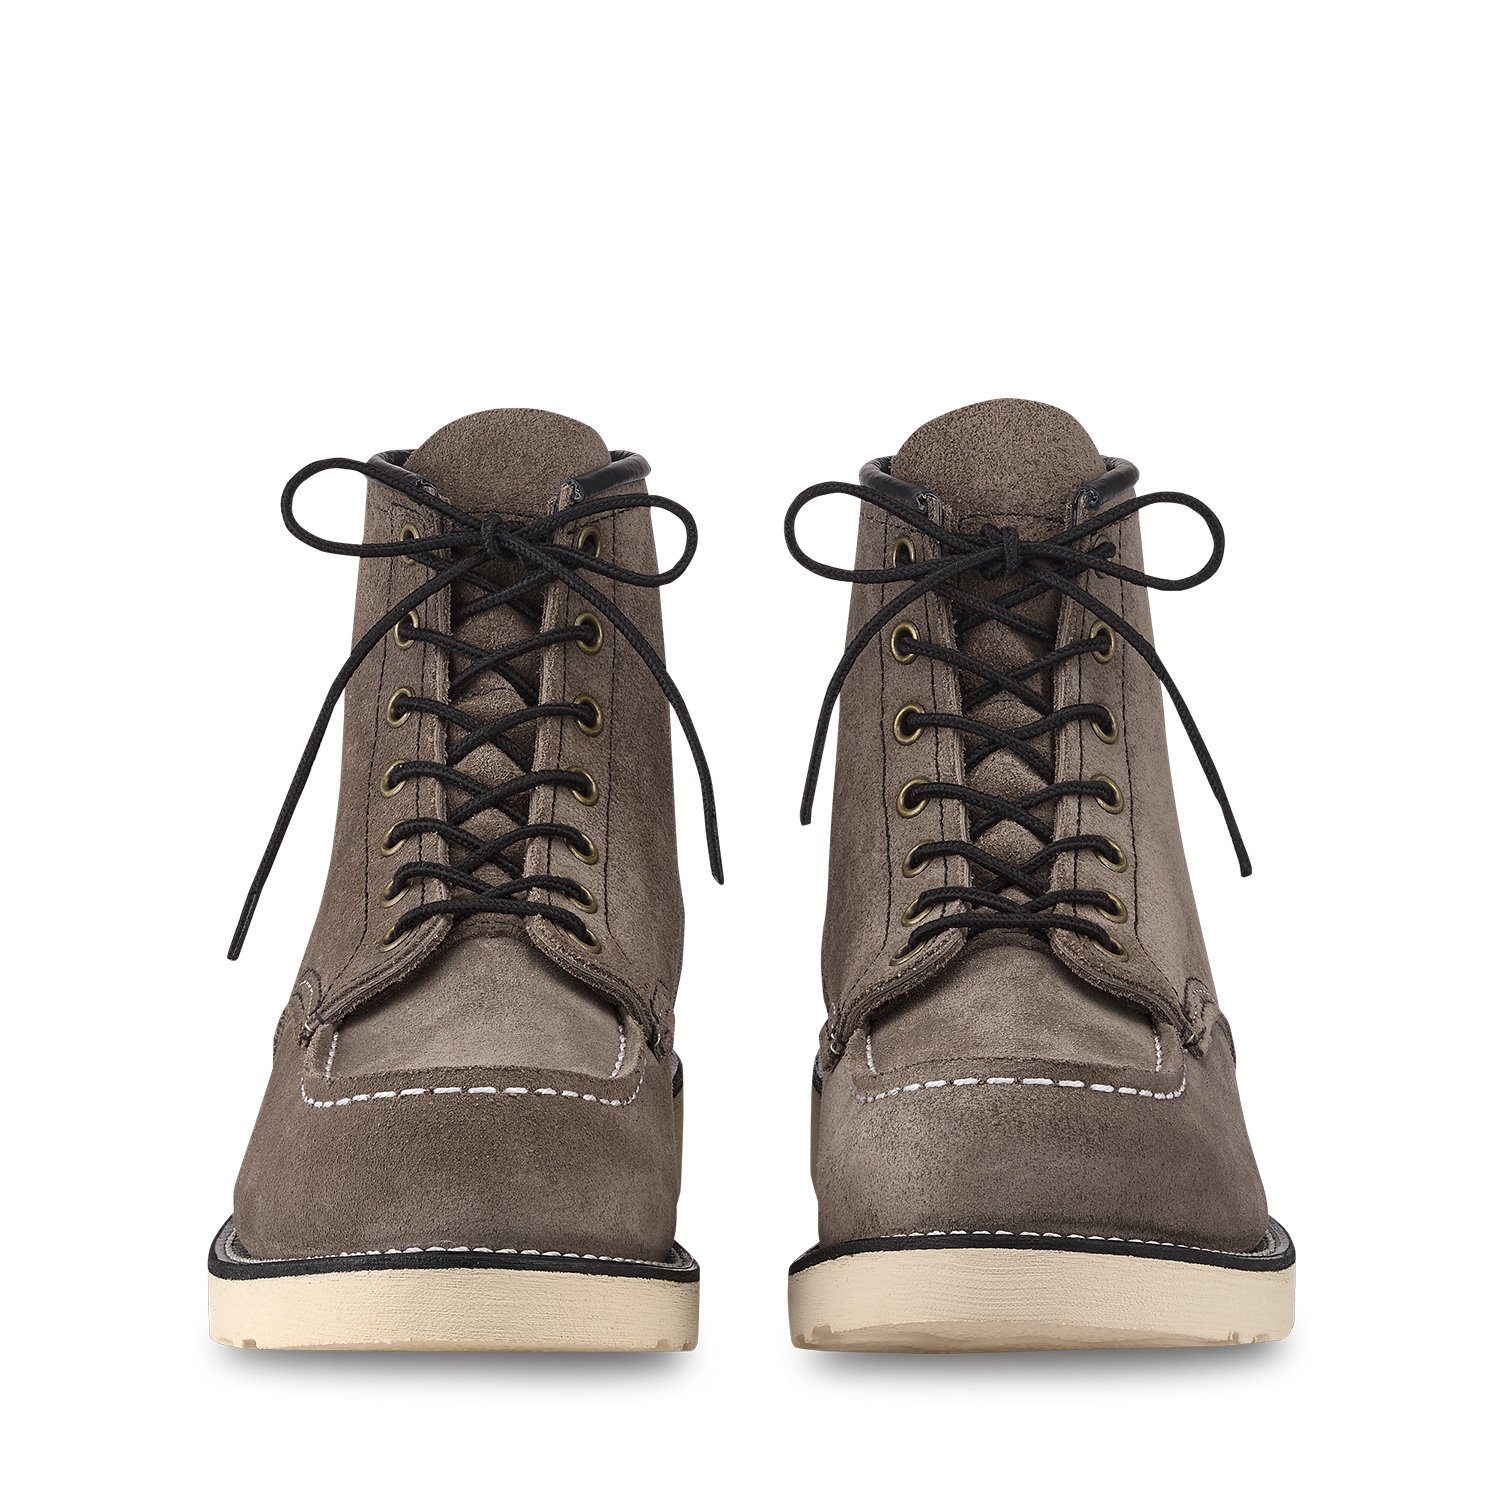 Red Wing Heritage Classic Moc 8863